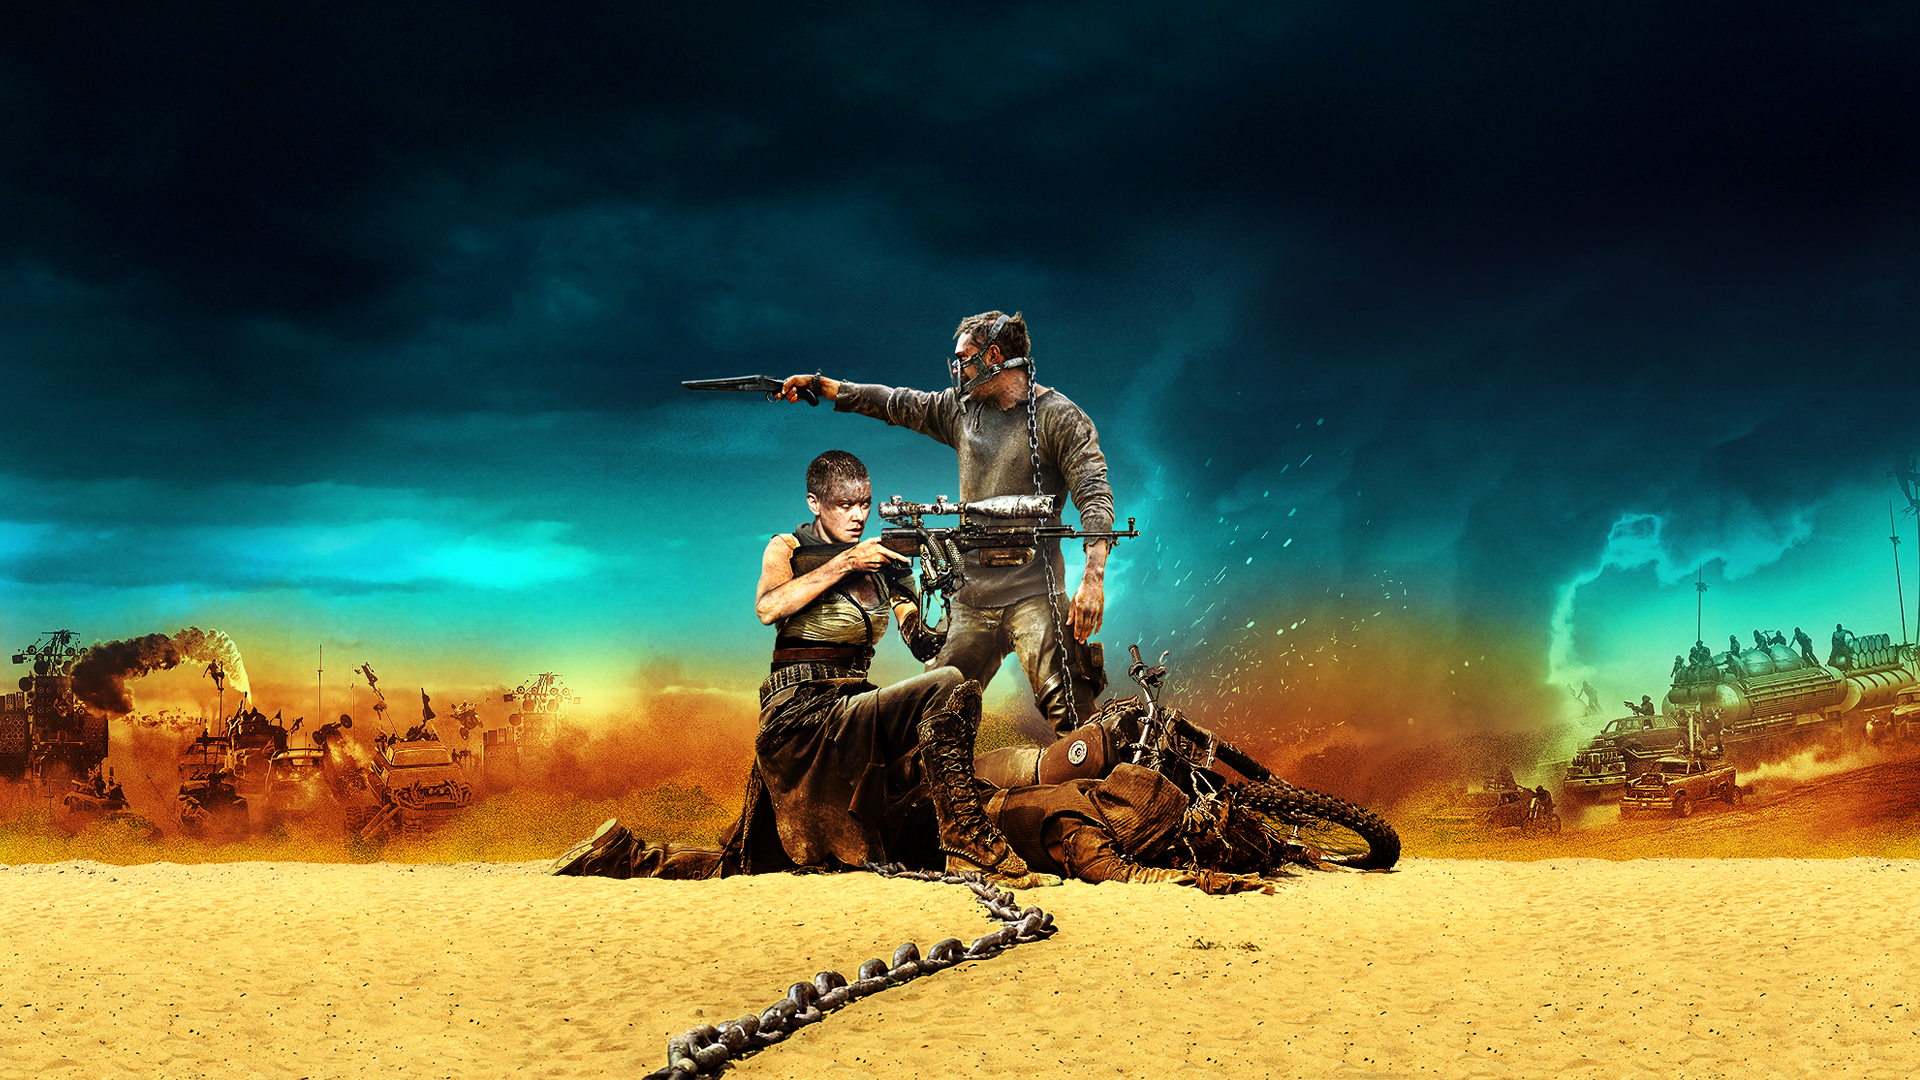 Mad Max Fury Road Wallpaper 1920x1080 by sachso74 on